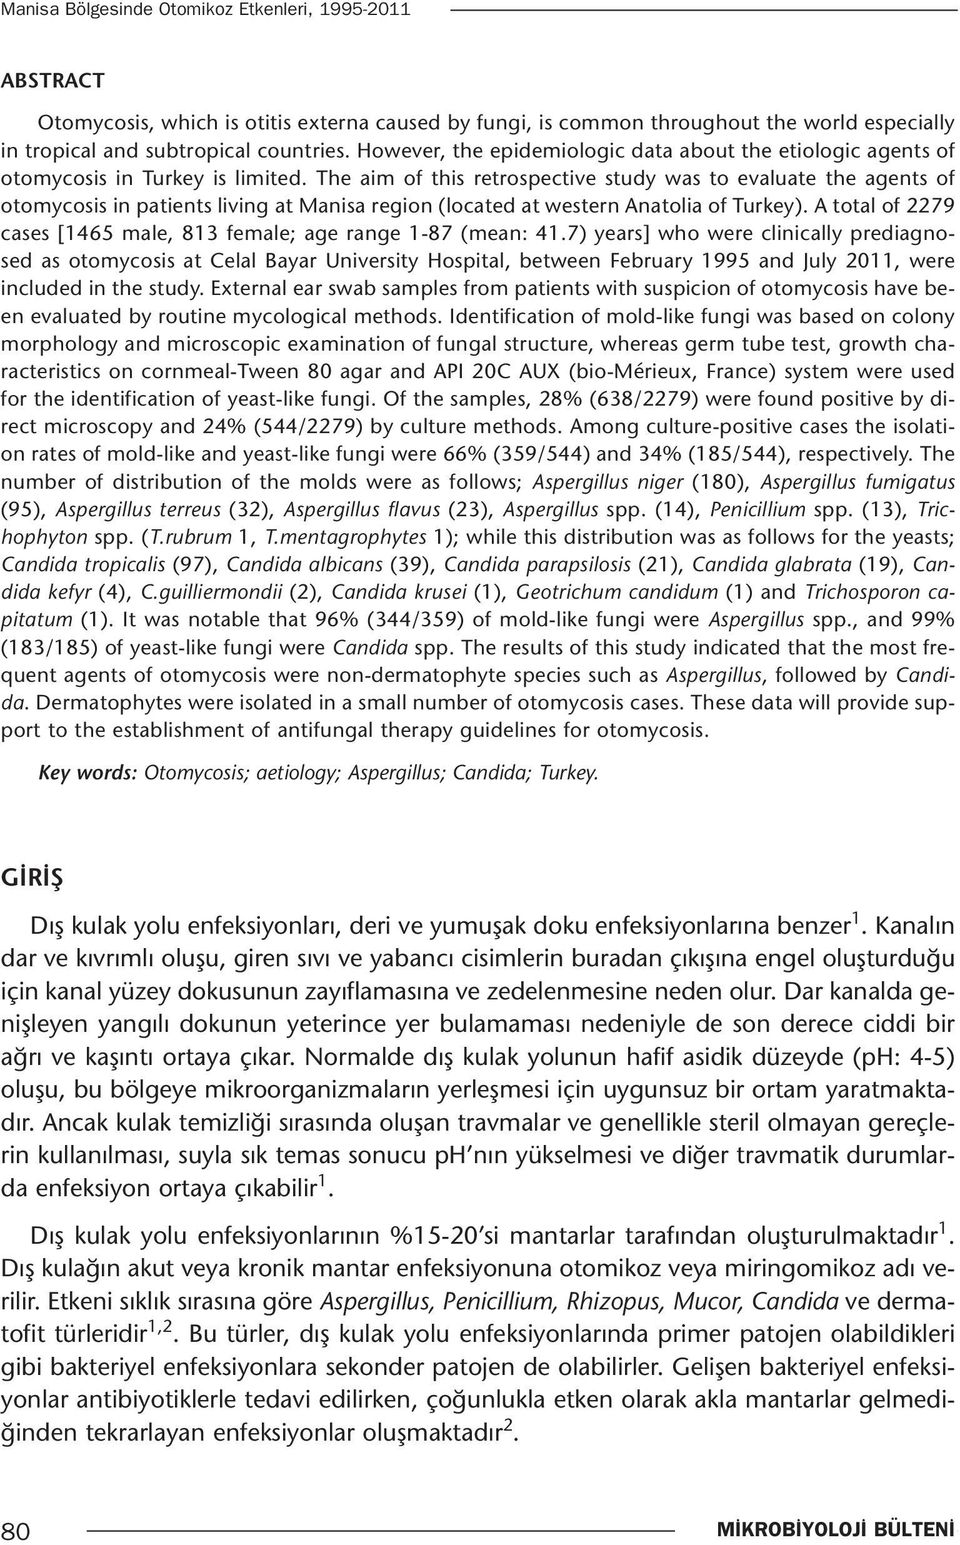 The aim of this retrospective study was to evaluate the agents of otomycosis in patients living at Manisa region (located at western Anatolia of Turkey).